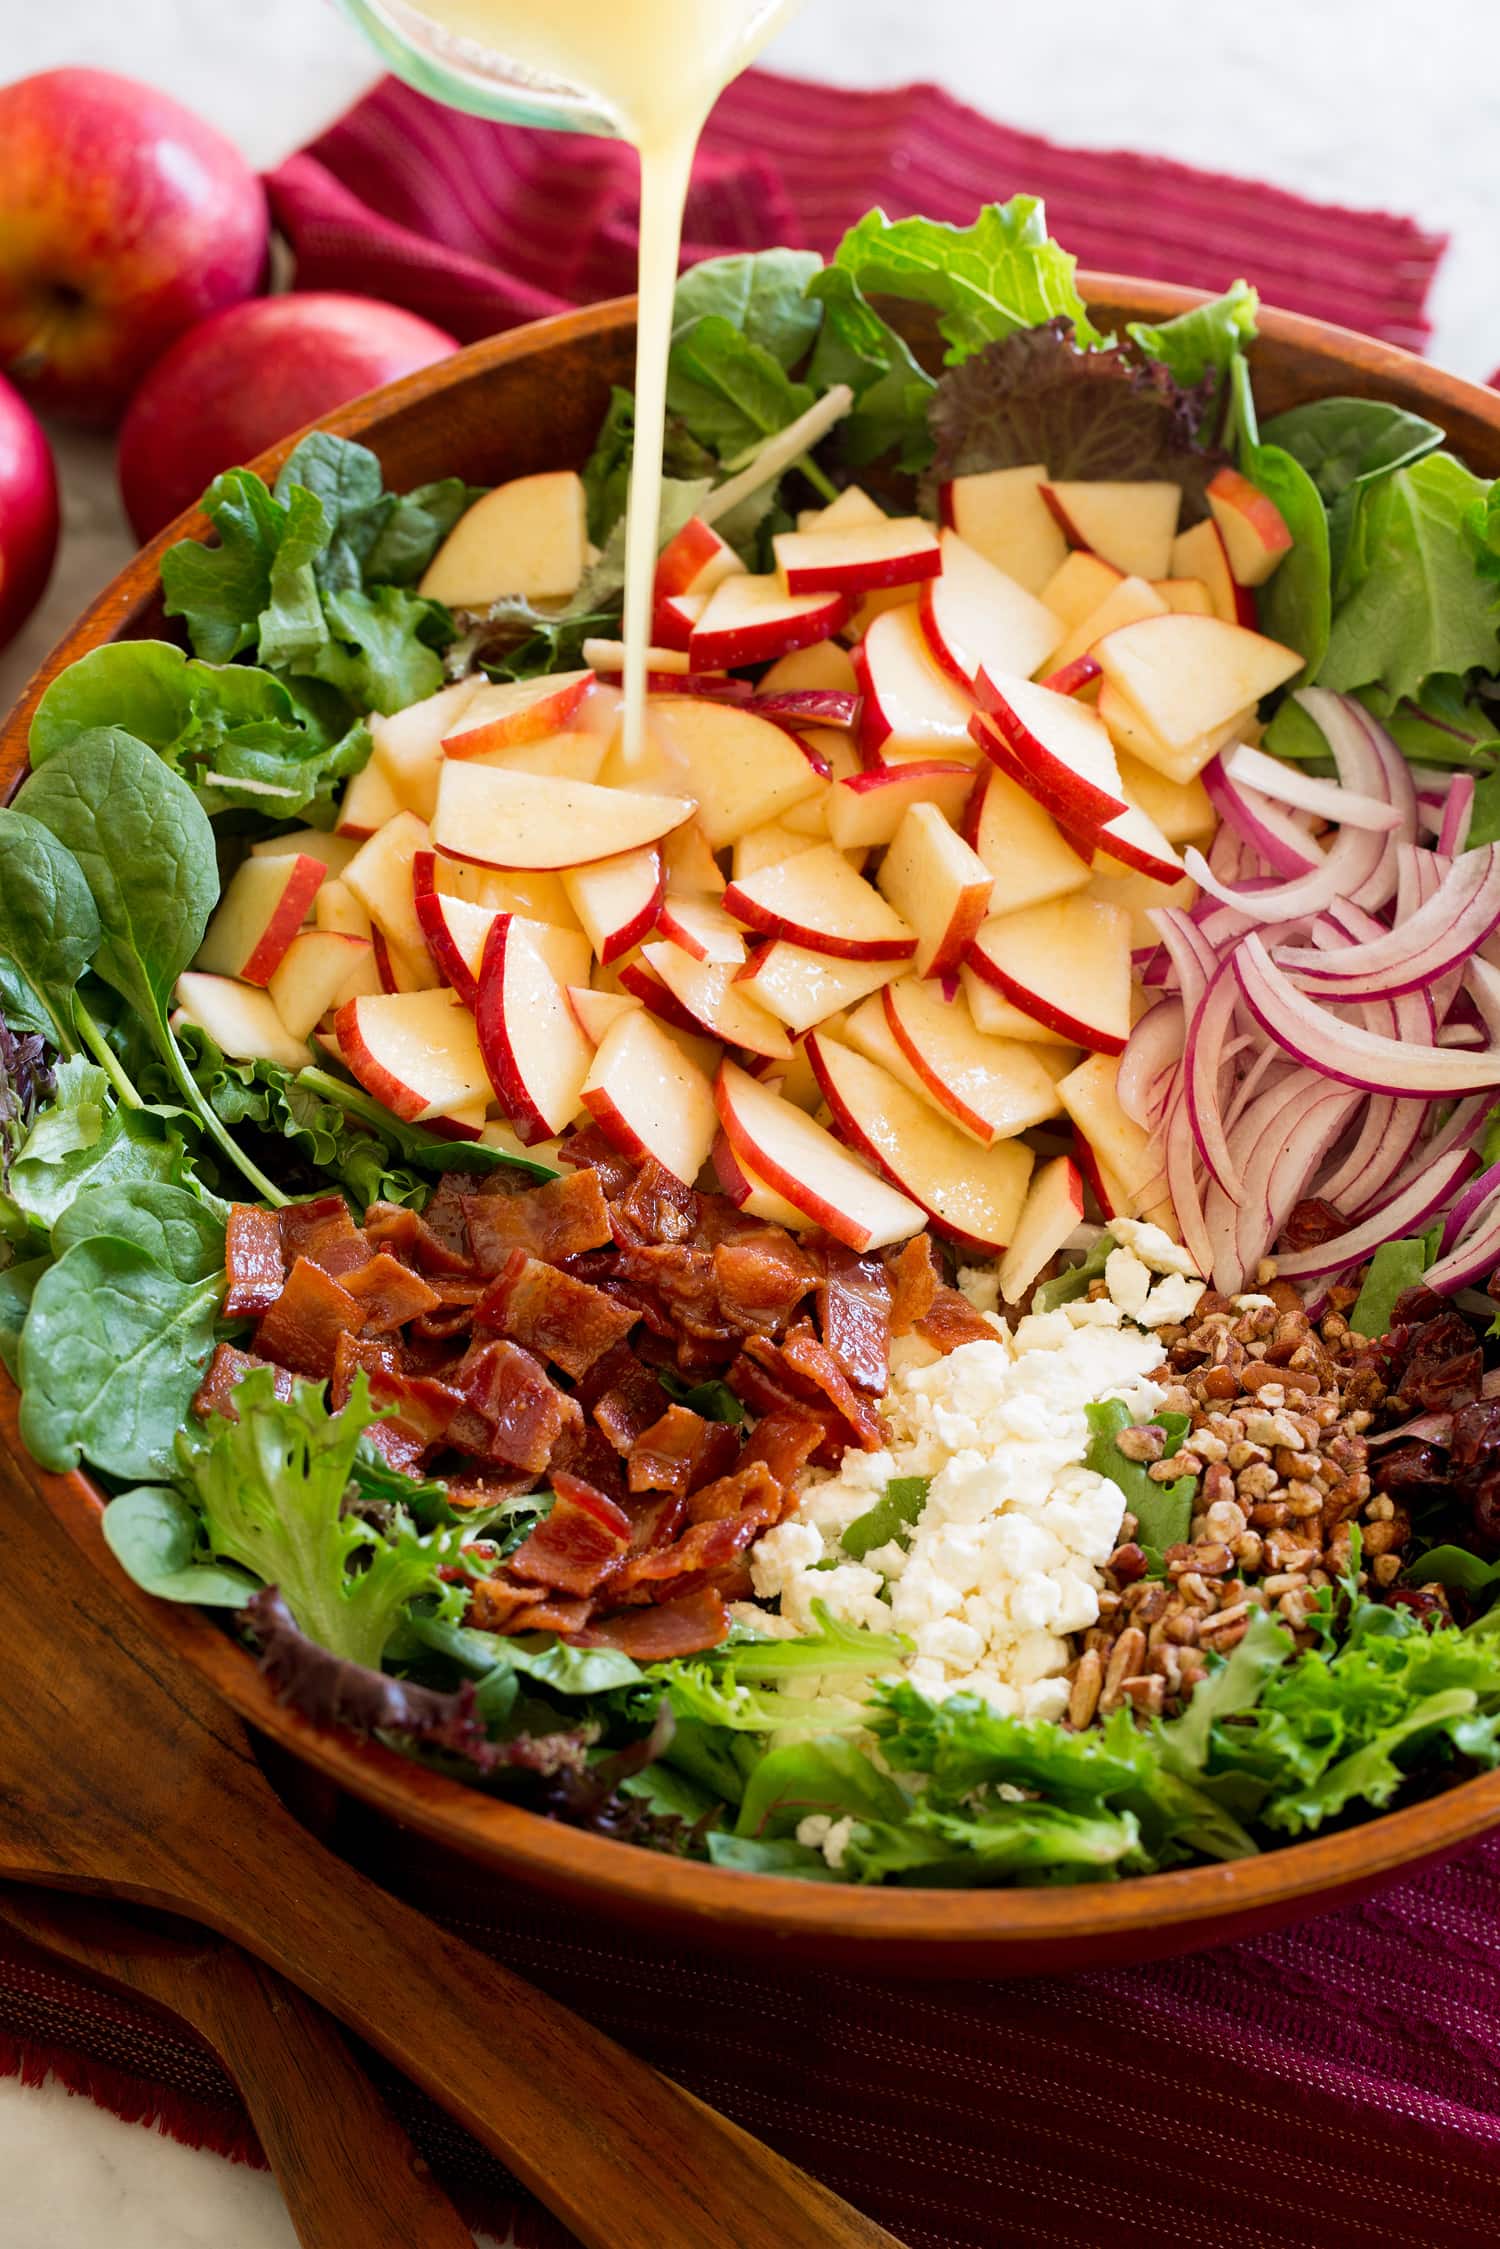 Adding dressing to salad with apples.